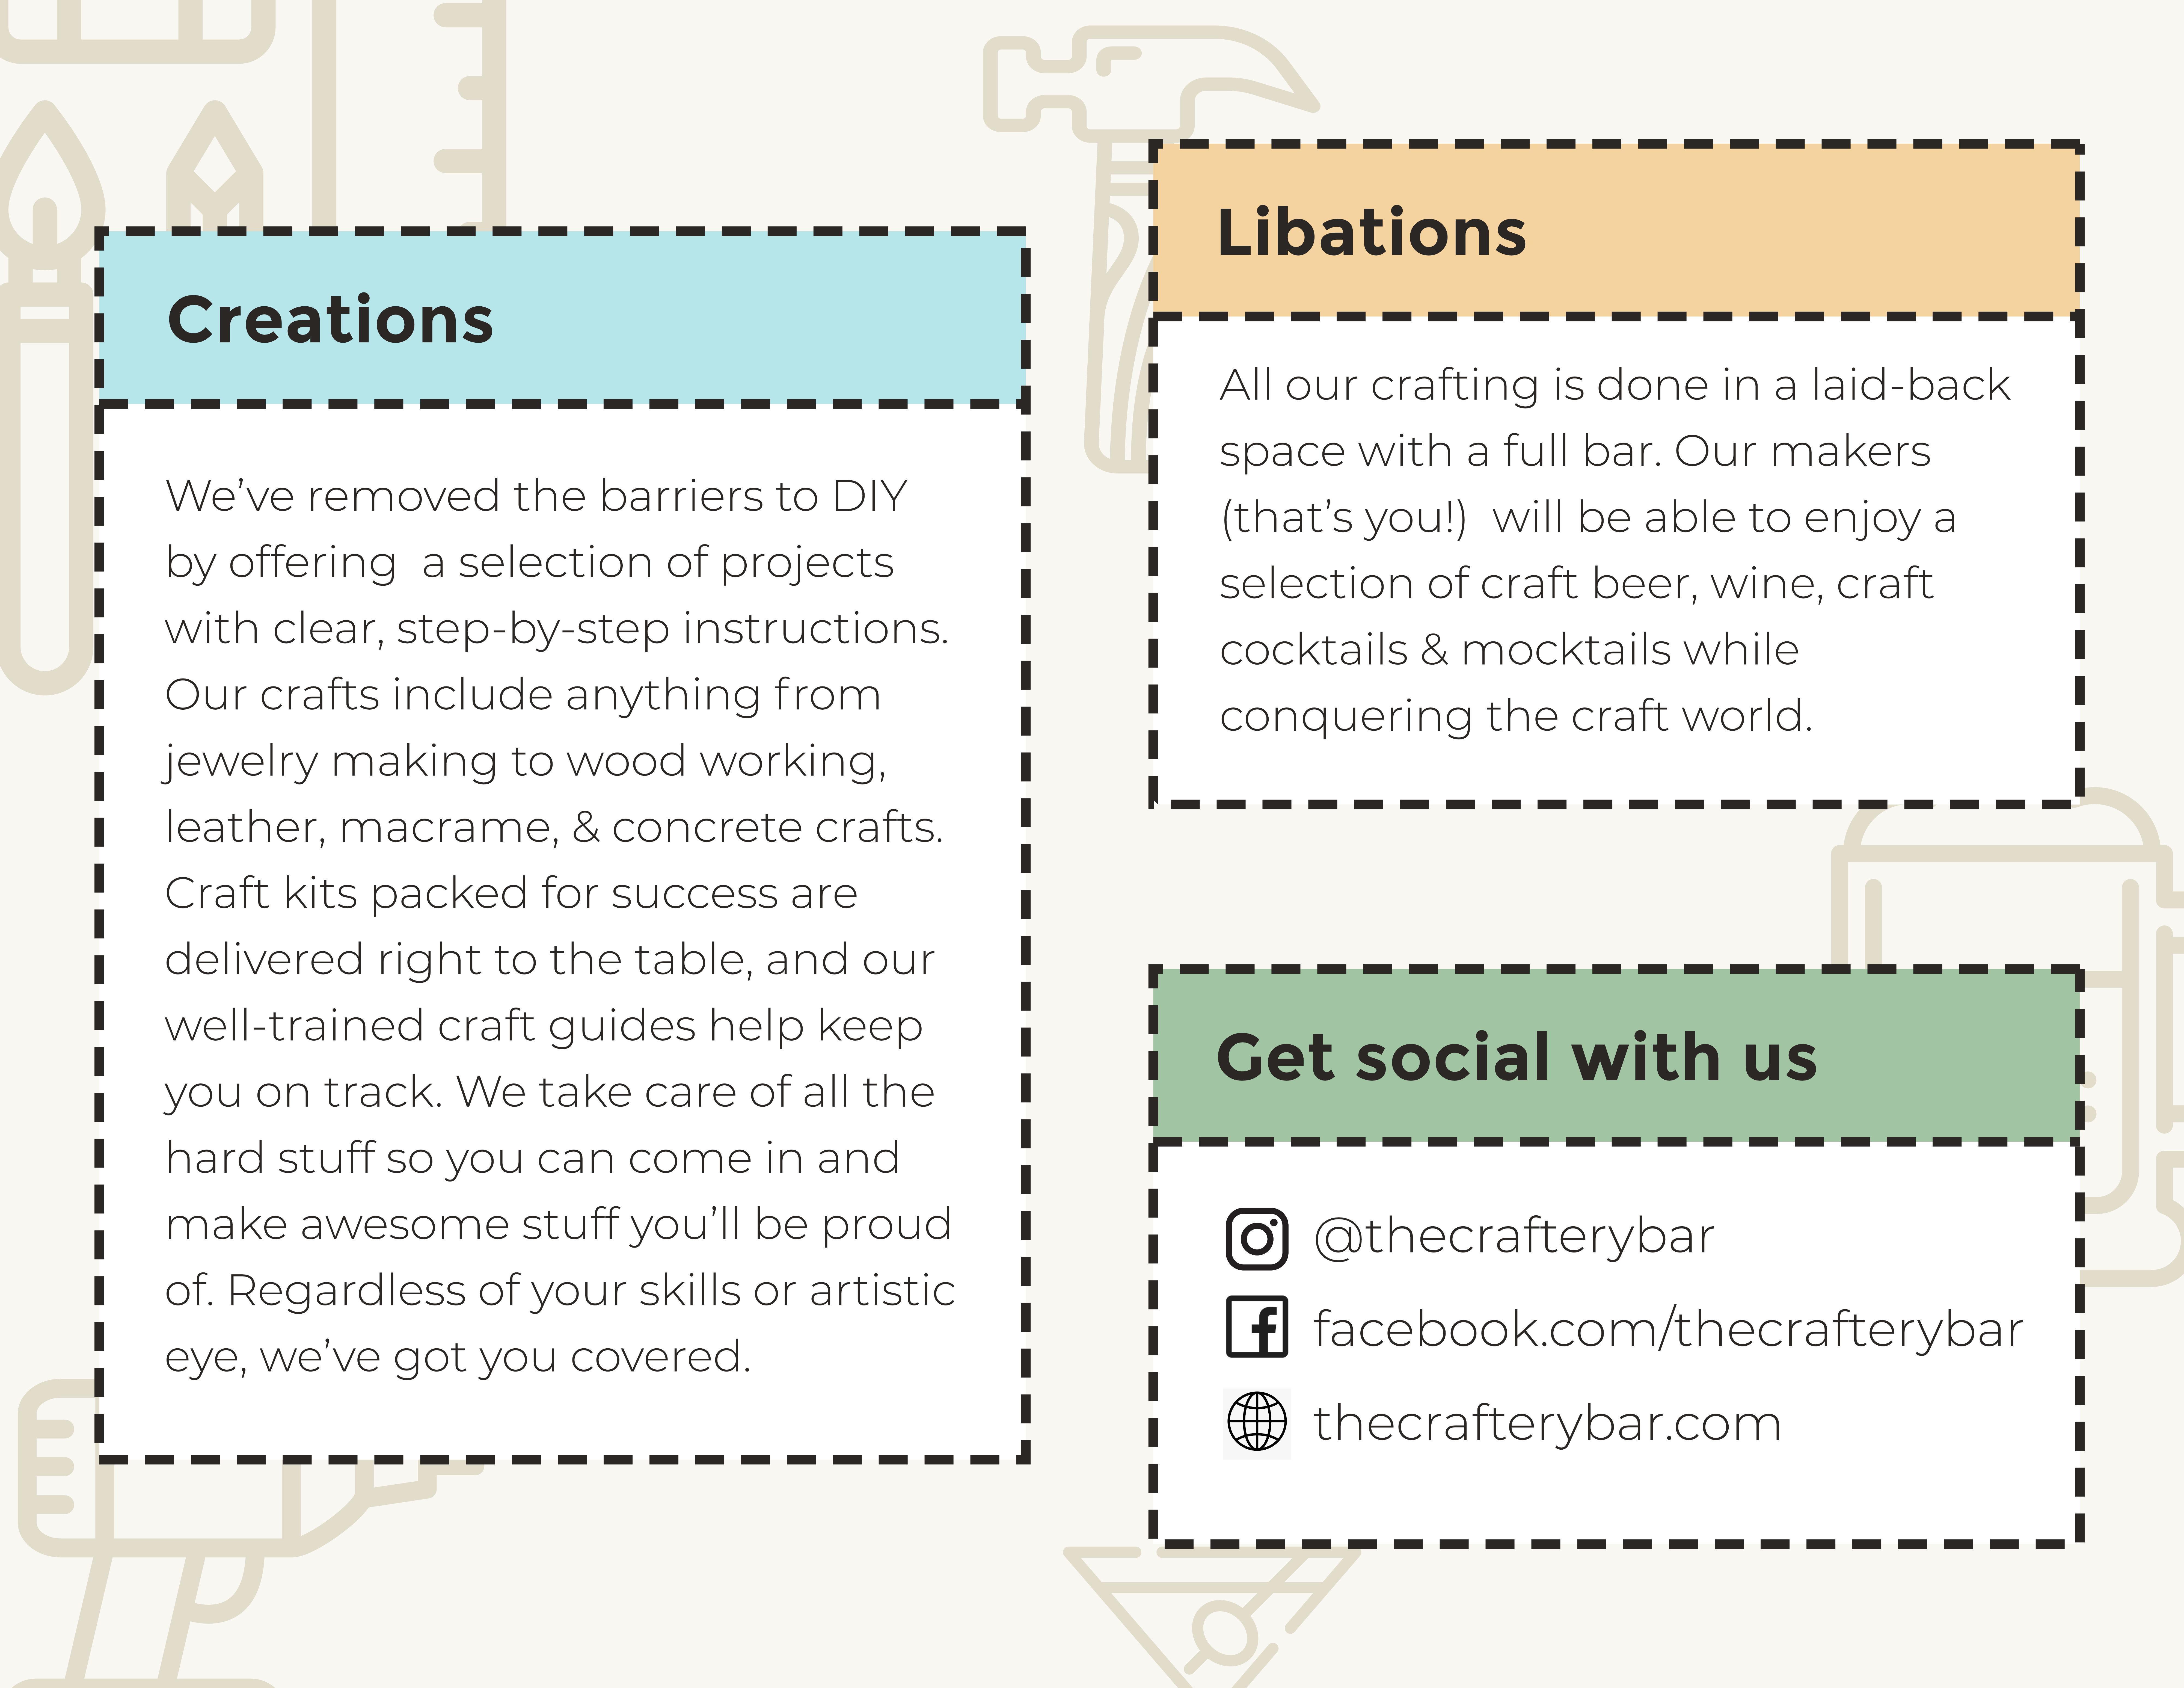 The Craftery handout